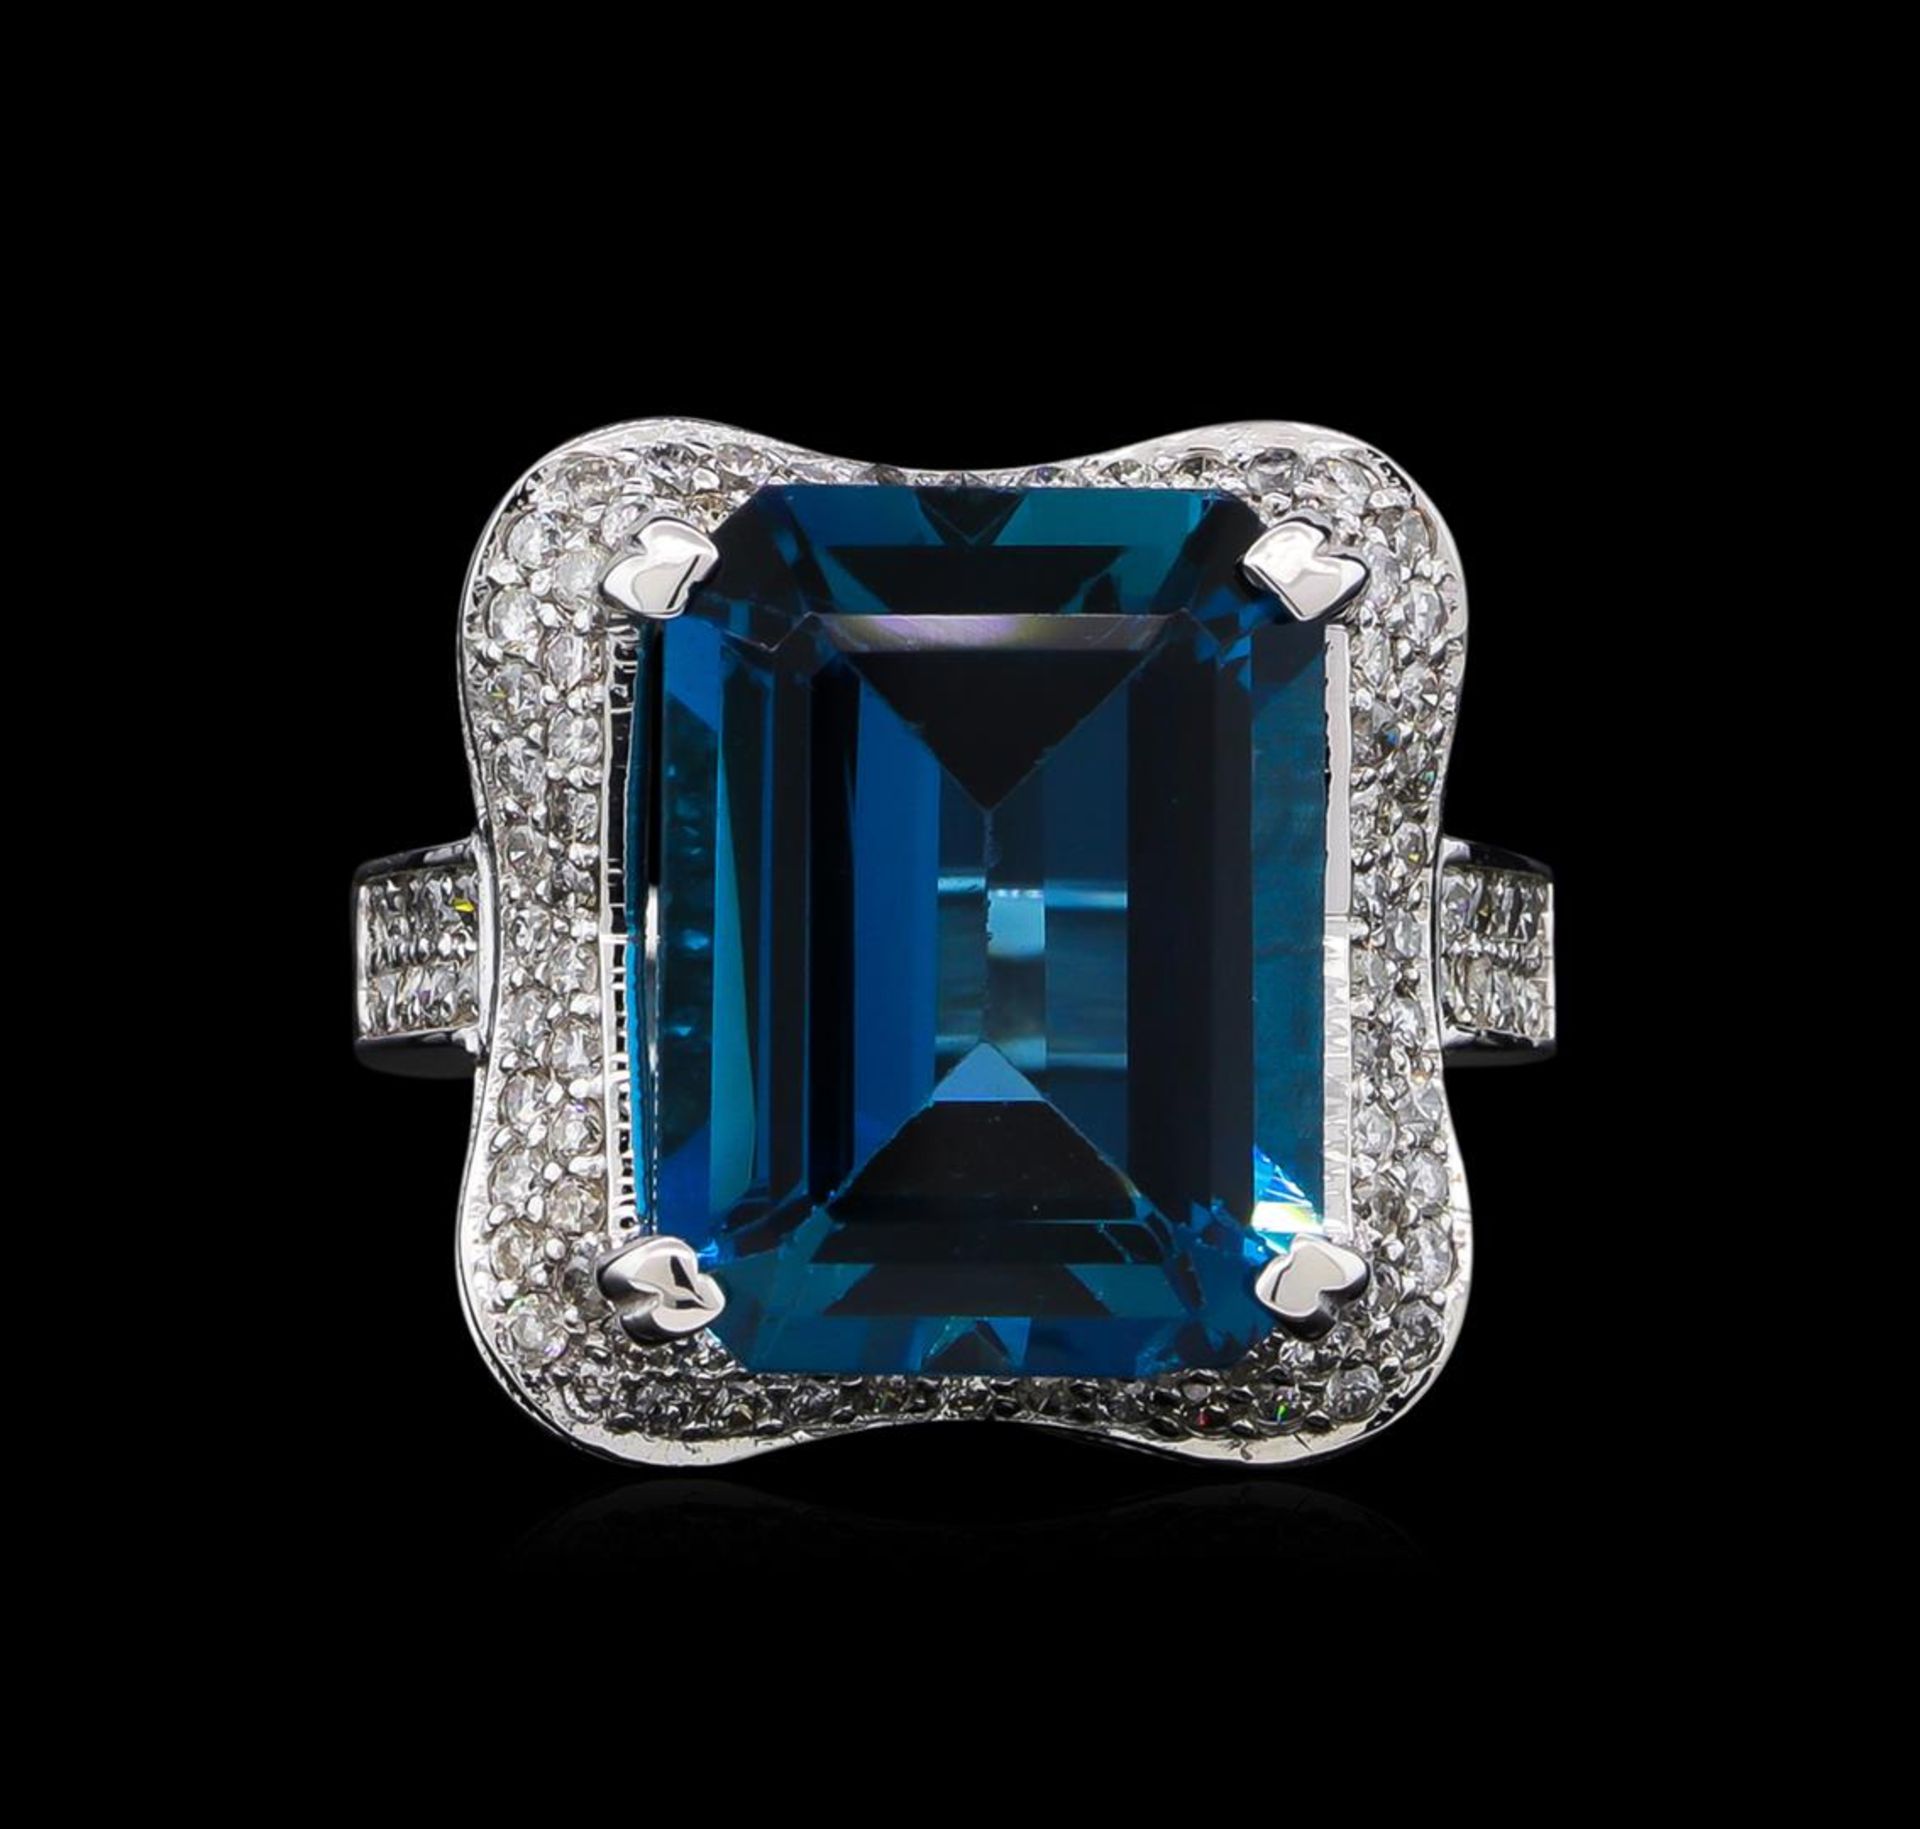 14KT White Gold 16.86 ctw Blue Topaz and Diamond Ring - Image 2 of 5